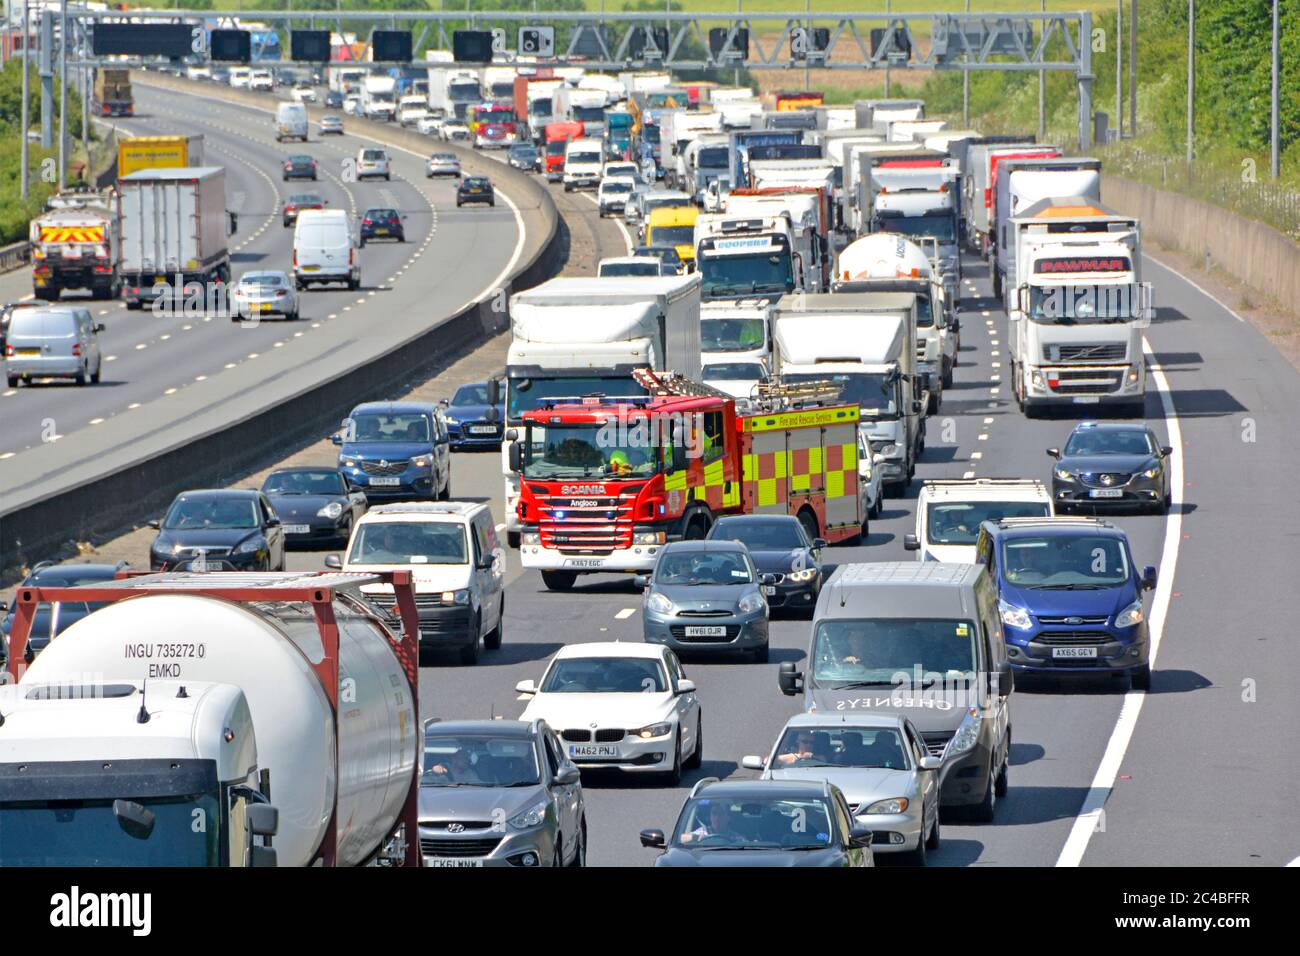 Traffic jam motorway gridlock & fire engines on emergency services call to reach scene of accident as cars & vans try to move away on m25 UK see note Stock Photo